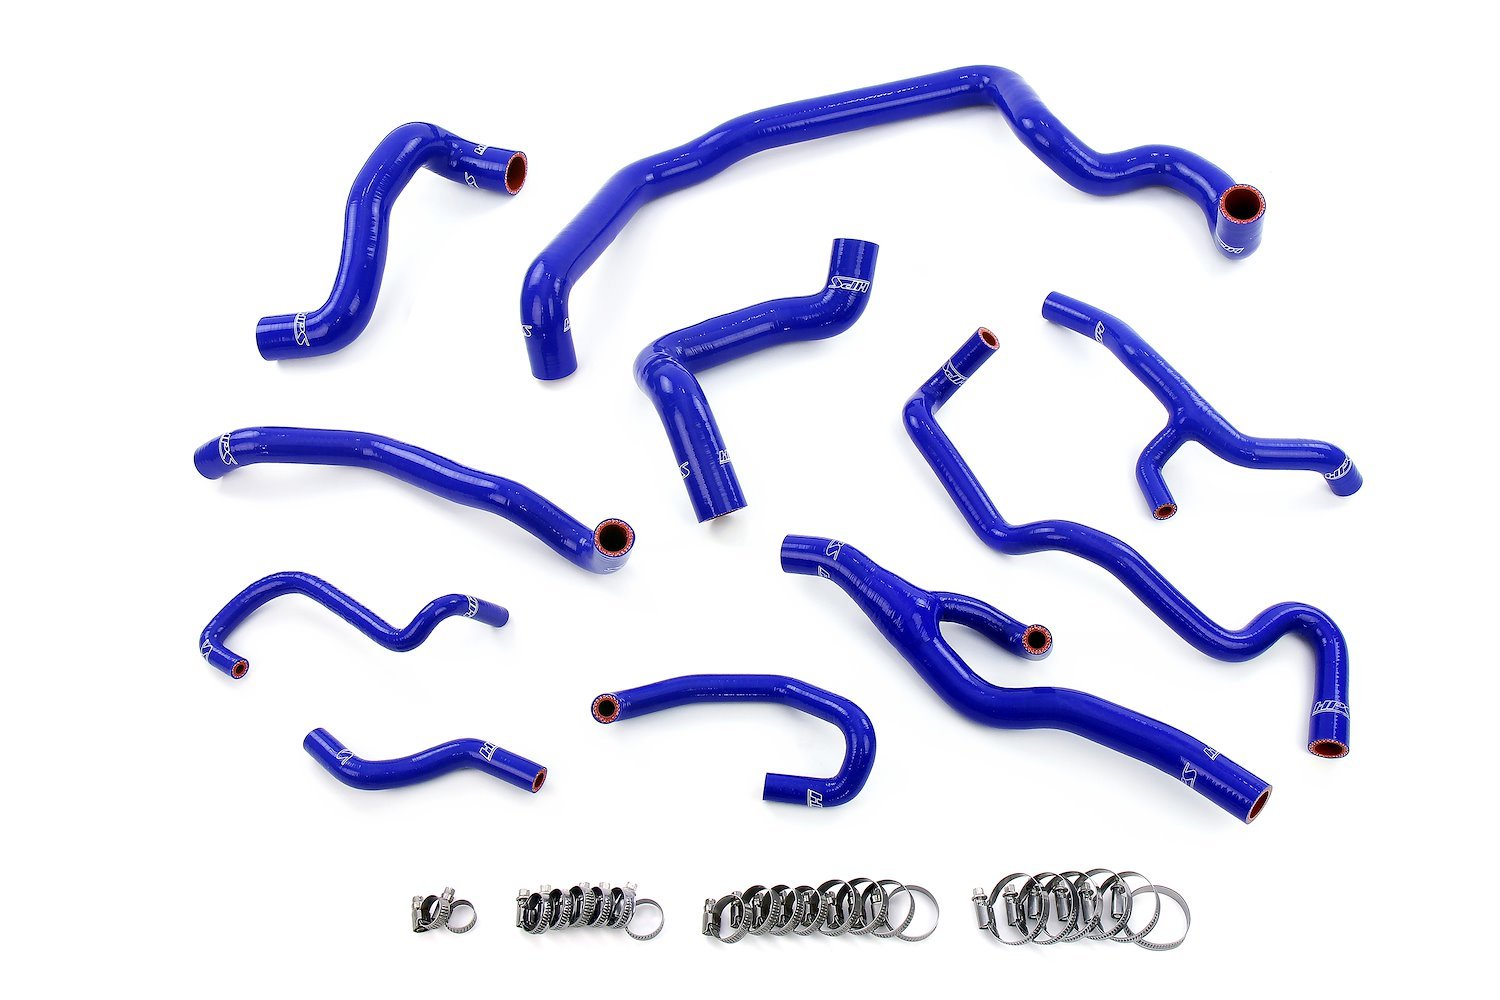 57-1998-BLUE Coolant Hose Kit, 3-Ply Reinforced Silicone Hoses, For Radiator, Heater, Water Pump, Expansion Tank